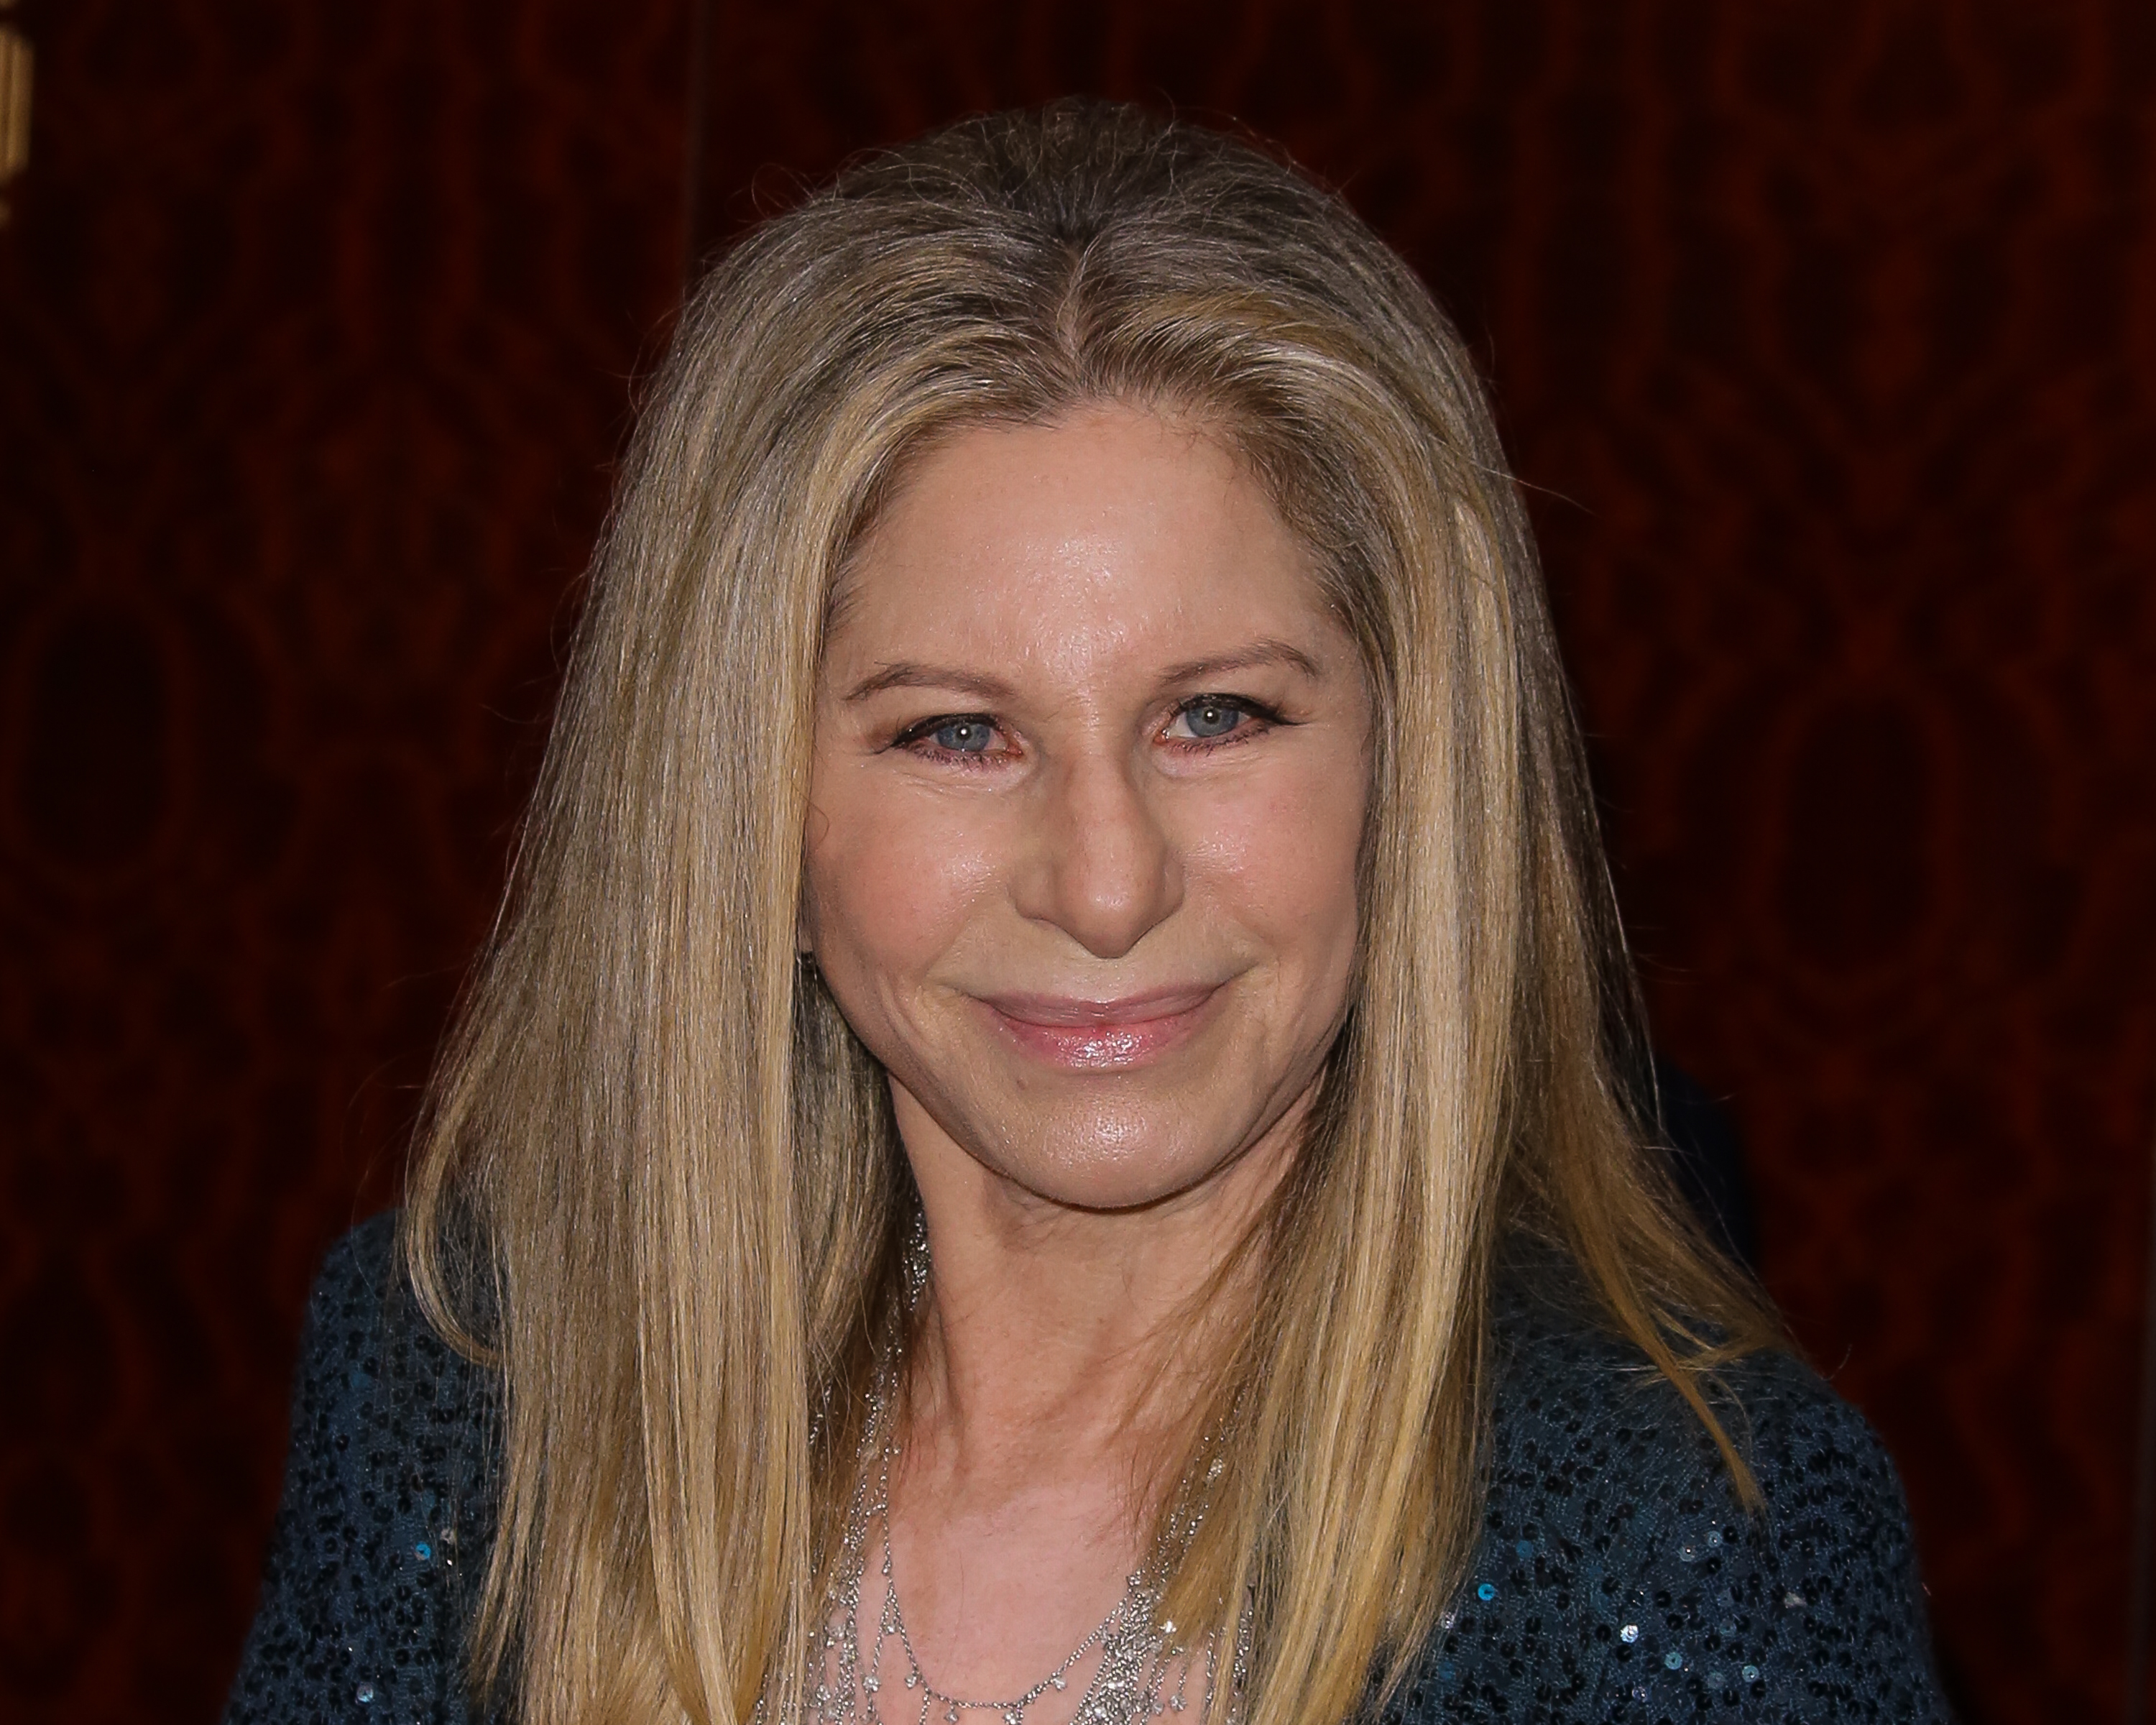 Actress Barbra Streisand attends the American Society Of Cinematographers 29th Annual Outstanding Achievement Awards at the Hyatt Regency Century Plaza on February 15, 2015 in Century City, California. (Paul Archuleta&mdash;FilmMagic/Getty Images)